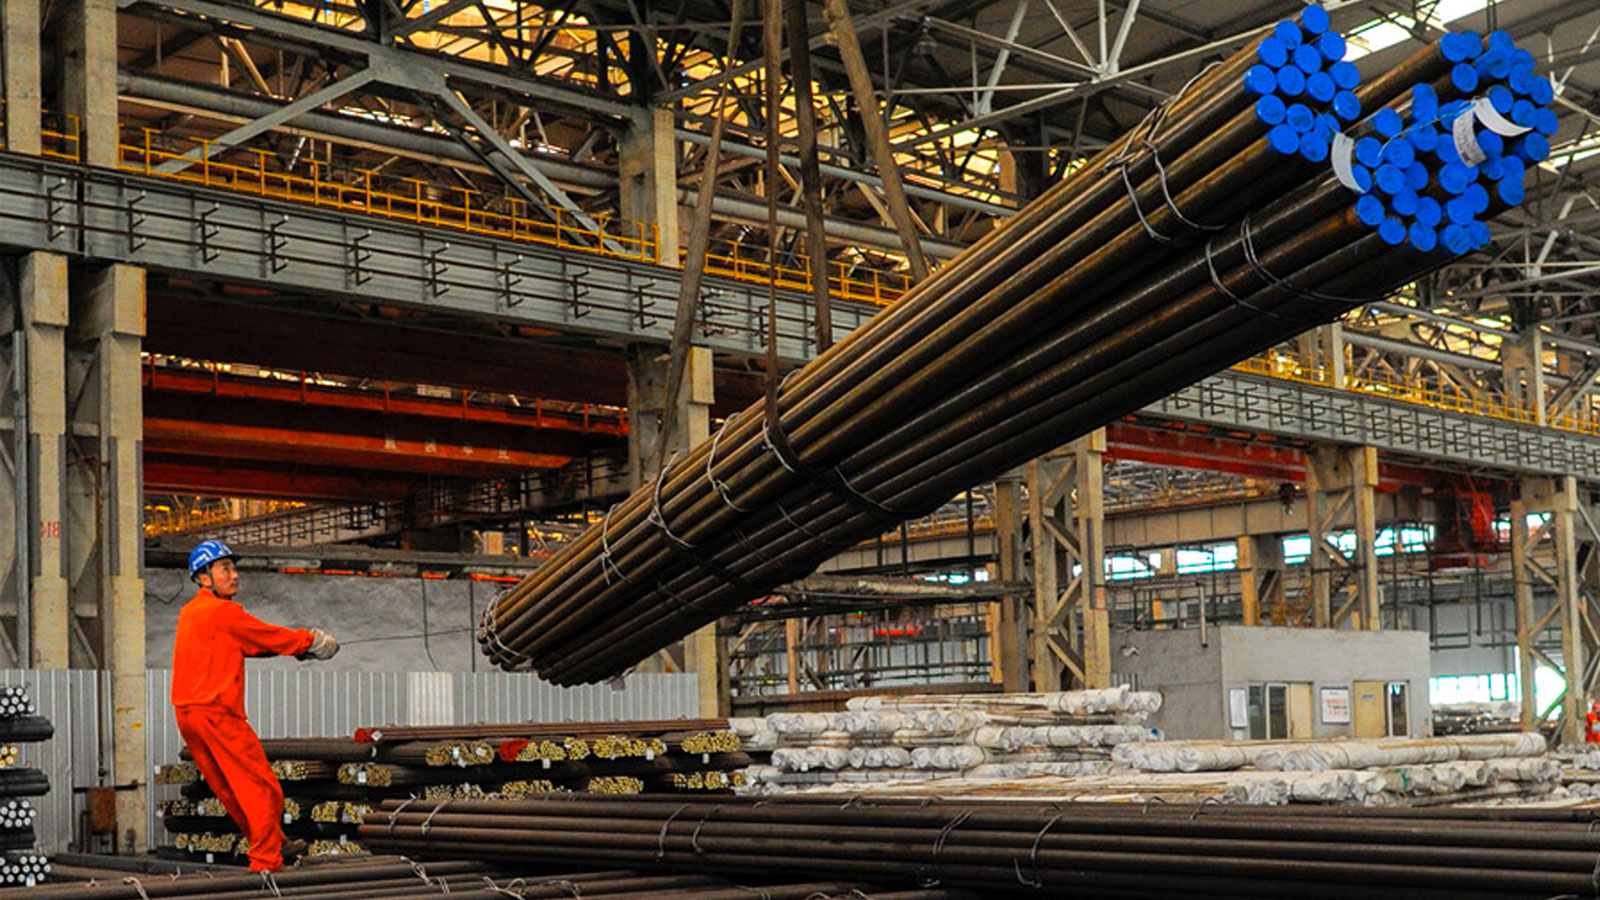 ▲ The cost and availability of steel from China is a huge factor in the materials supply issue.